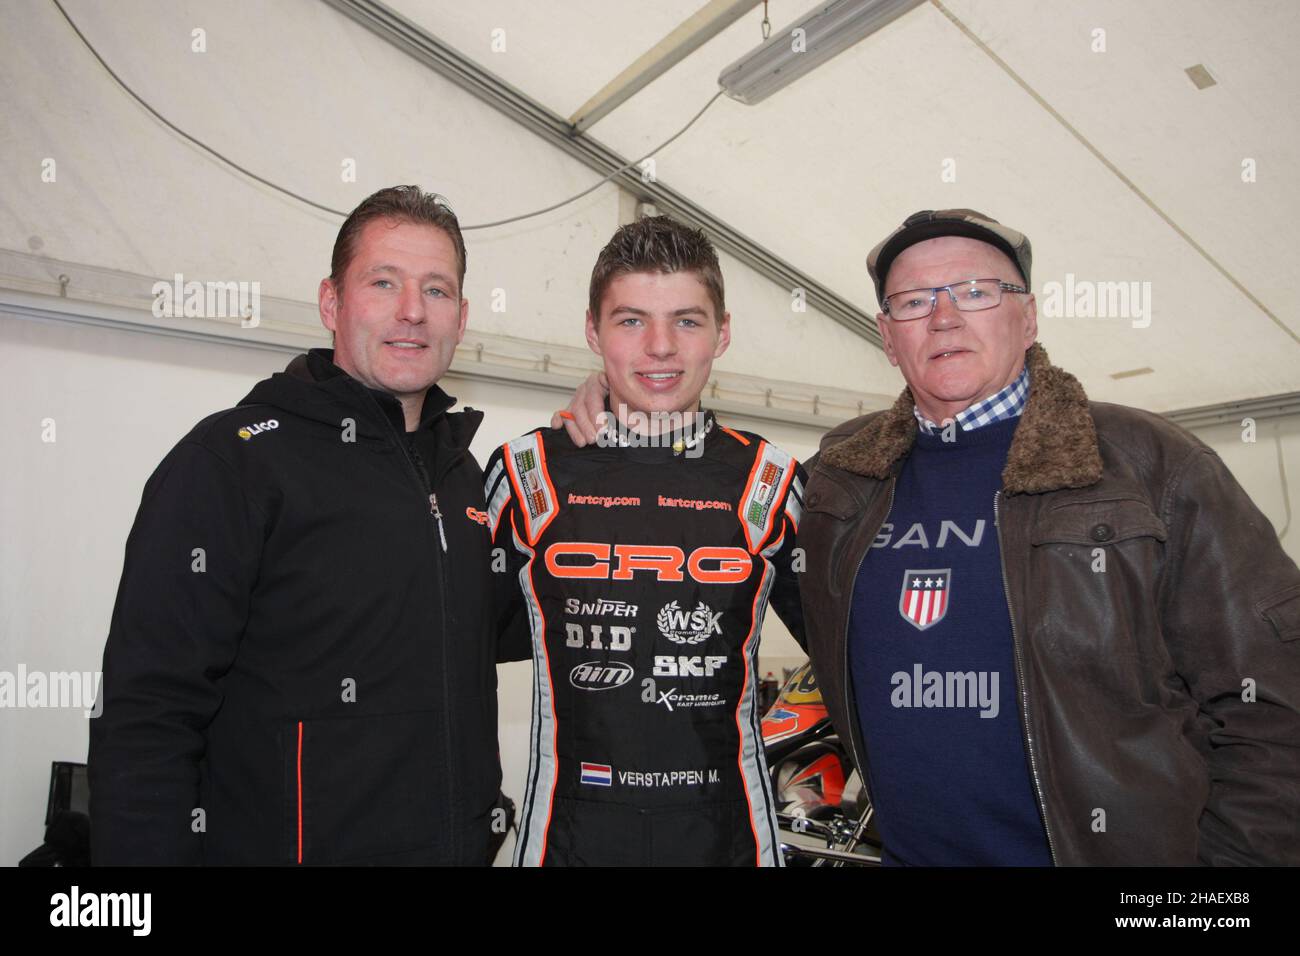 Max Verstappen (Ned), CRG TM, portrait podium with his father Jos and